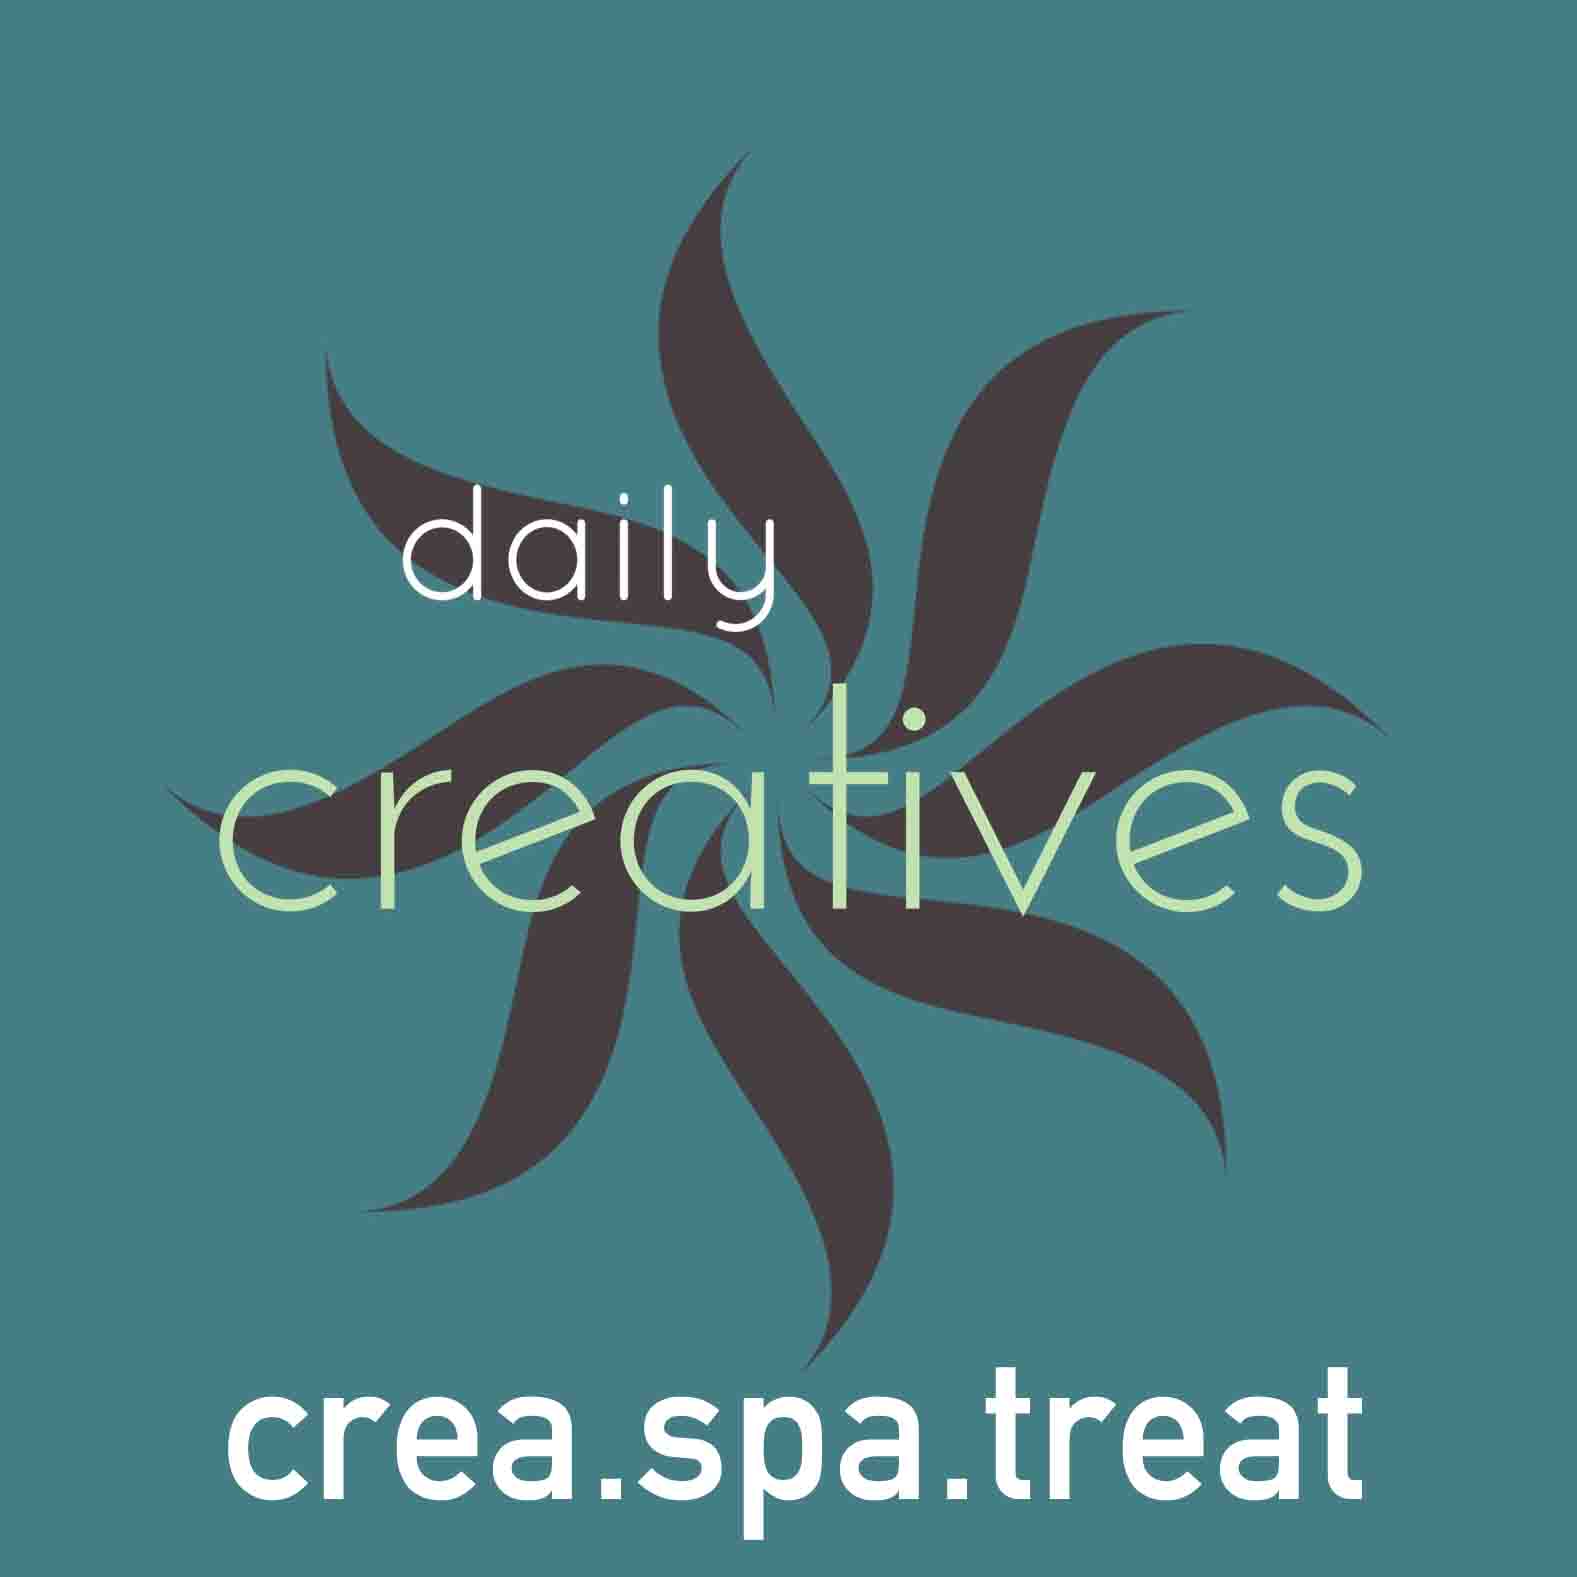 crea.spa.treat. what do you think it means?